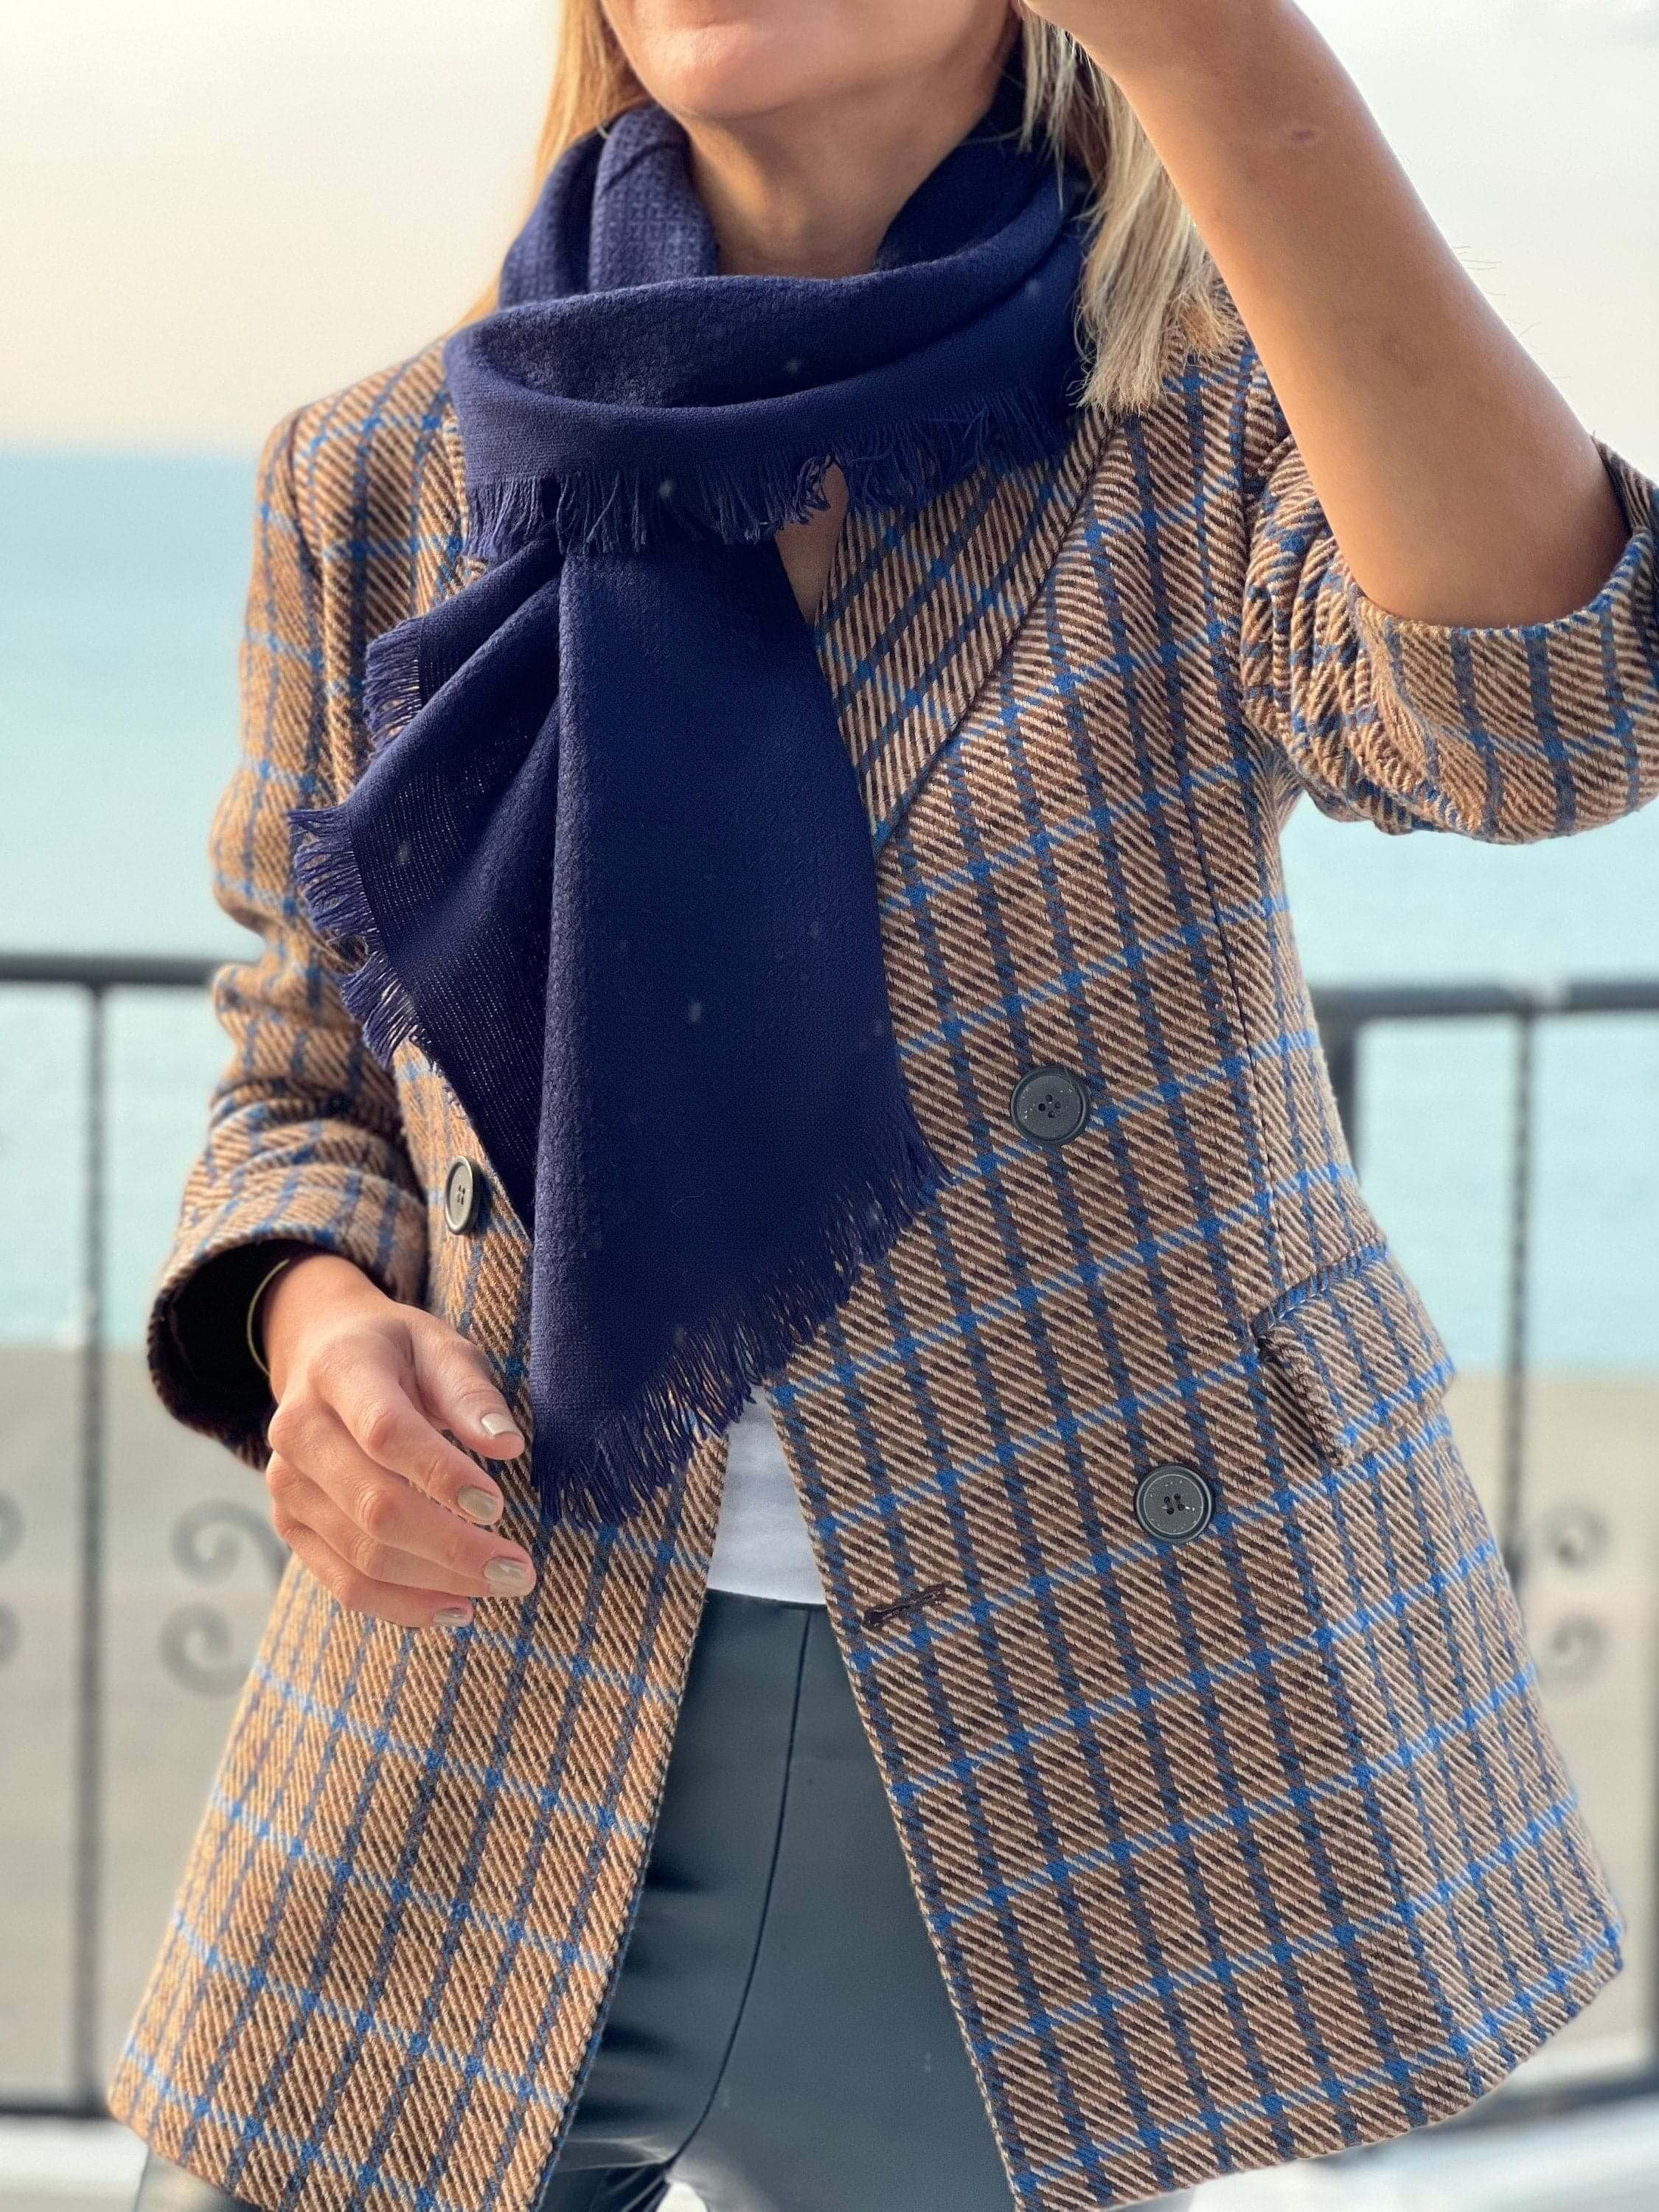 Stay warm and cozy this winter with this navy blue cotton wool blend scarf. A perfect gift for her, this solid scarf is soft and comfortable.